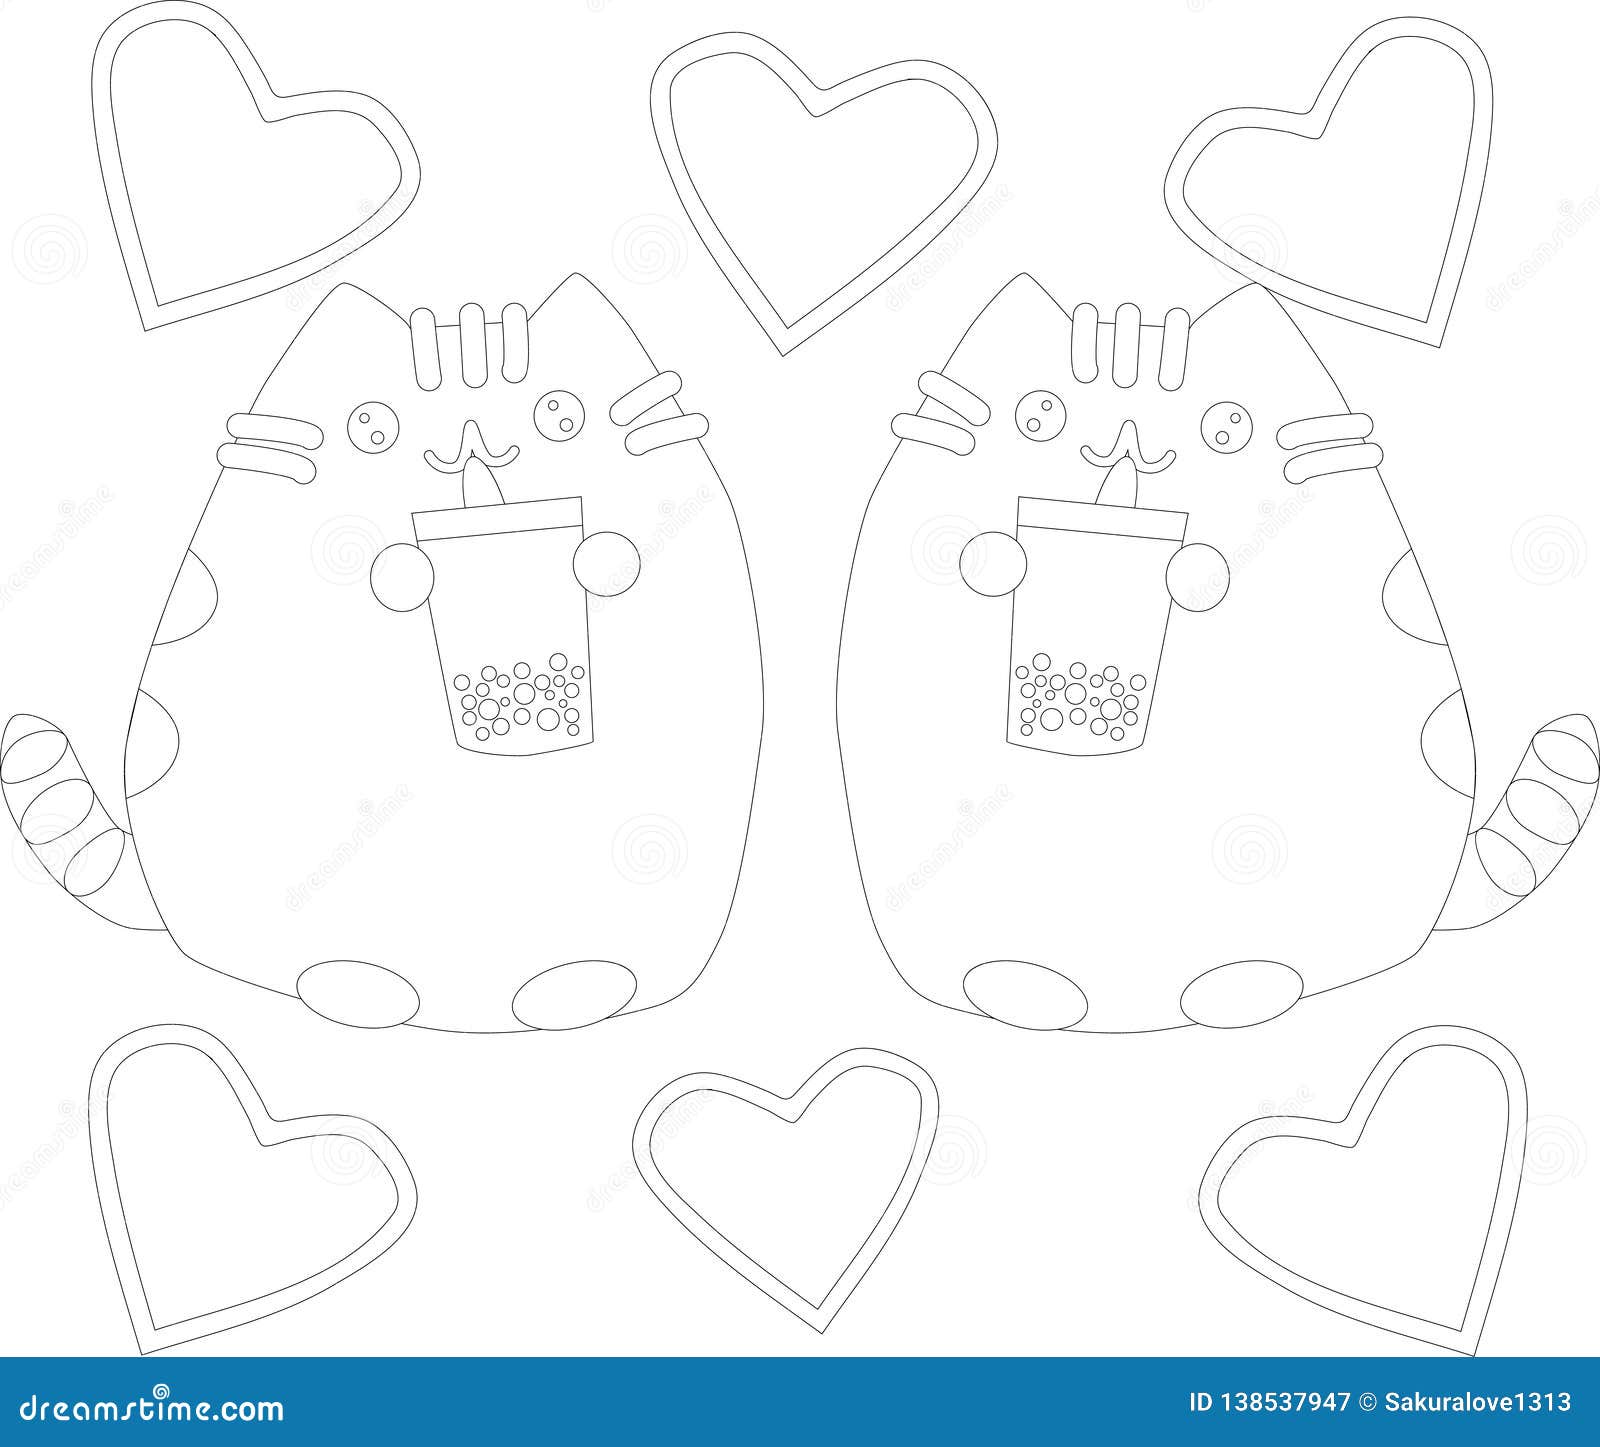 Coloring Page Outline of Cartoon Fluffy Cat. Coloring Book Stock ...